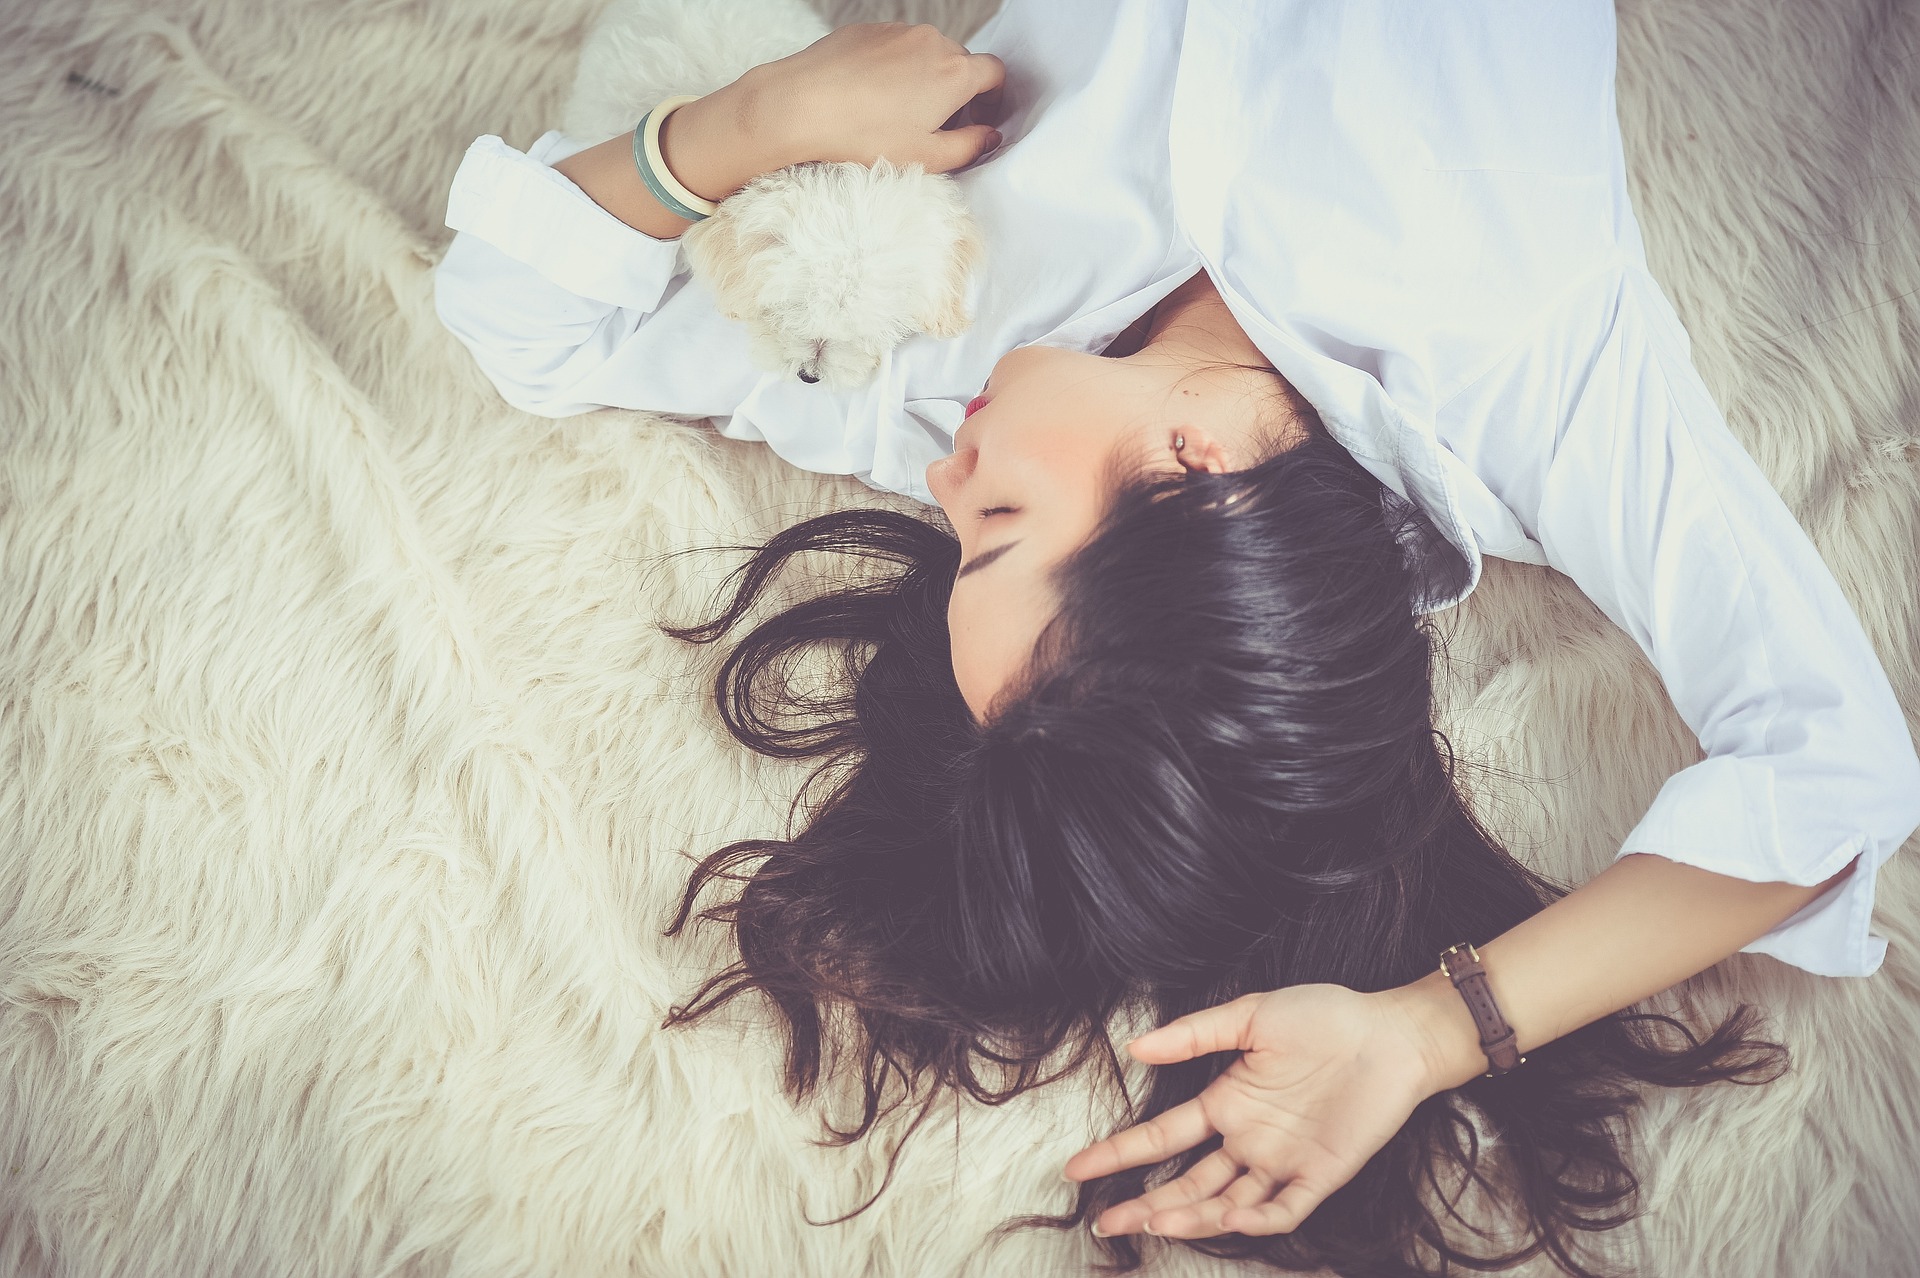 woman with long dark hair lying on bed with small white dog